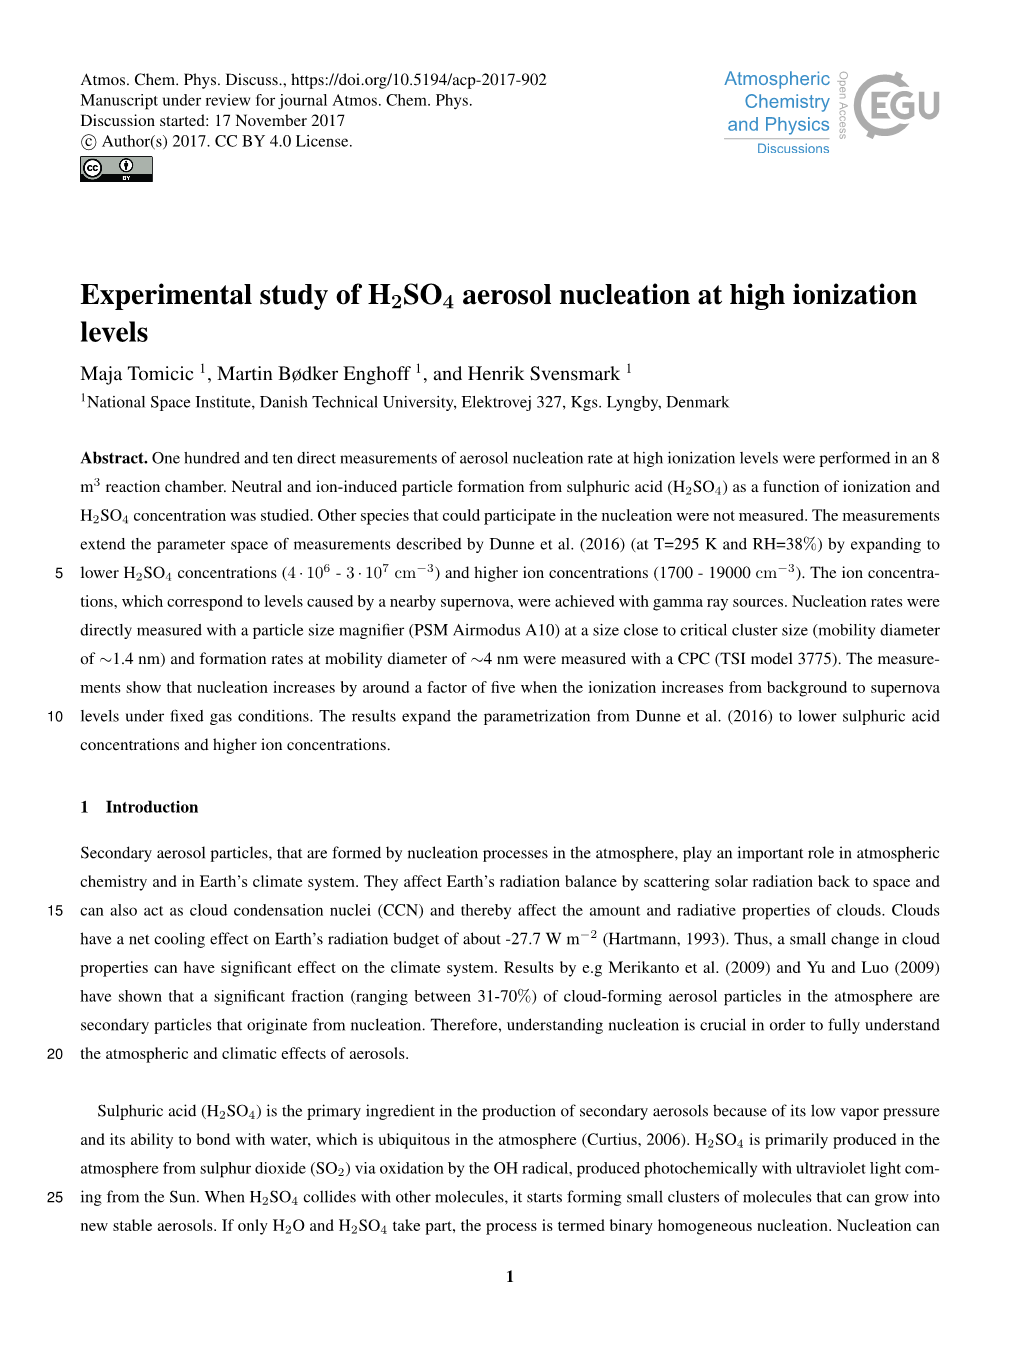 Experimental Study of H2SO4 Aerosol Nucleation at High Ionization